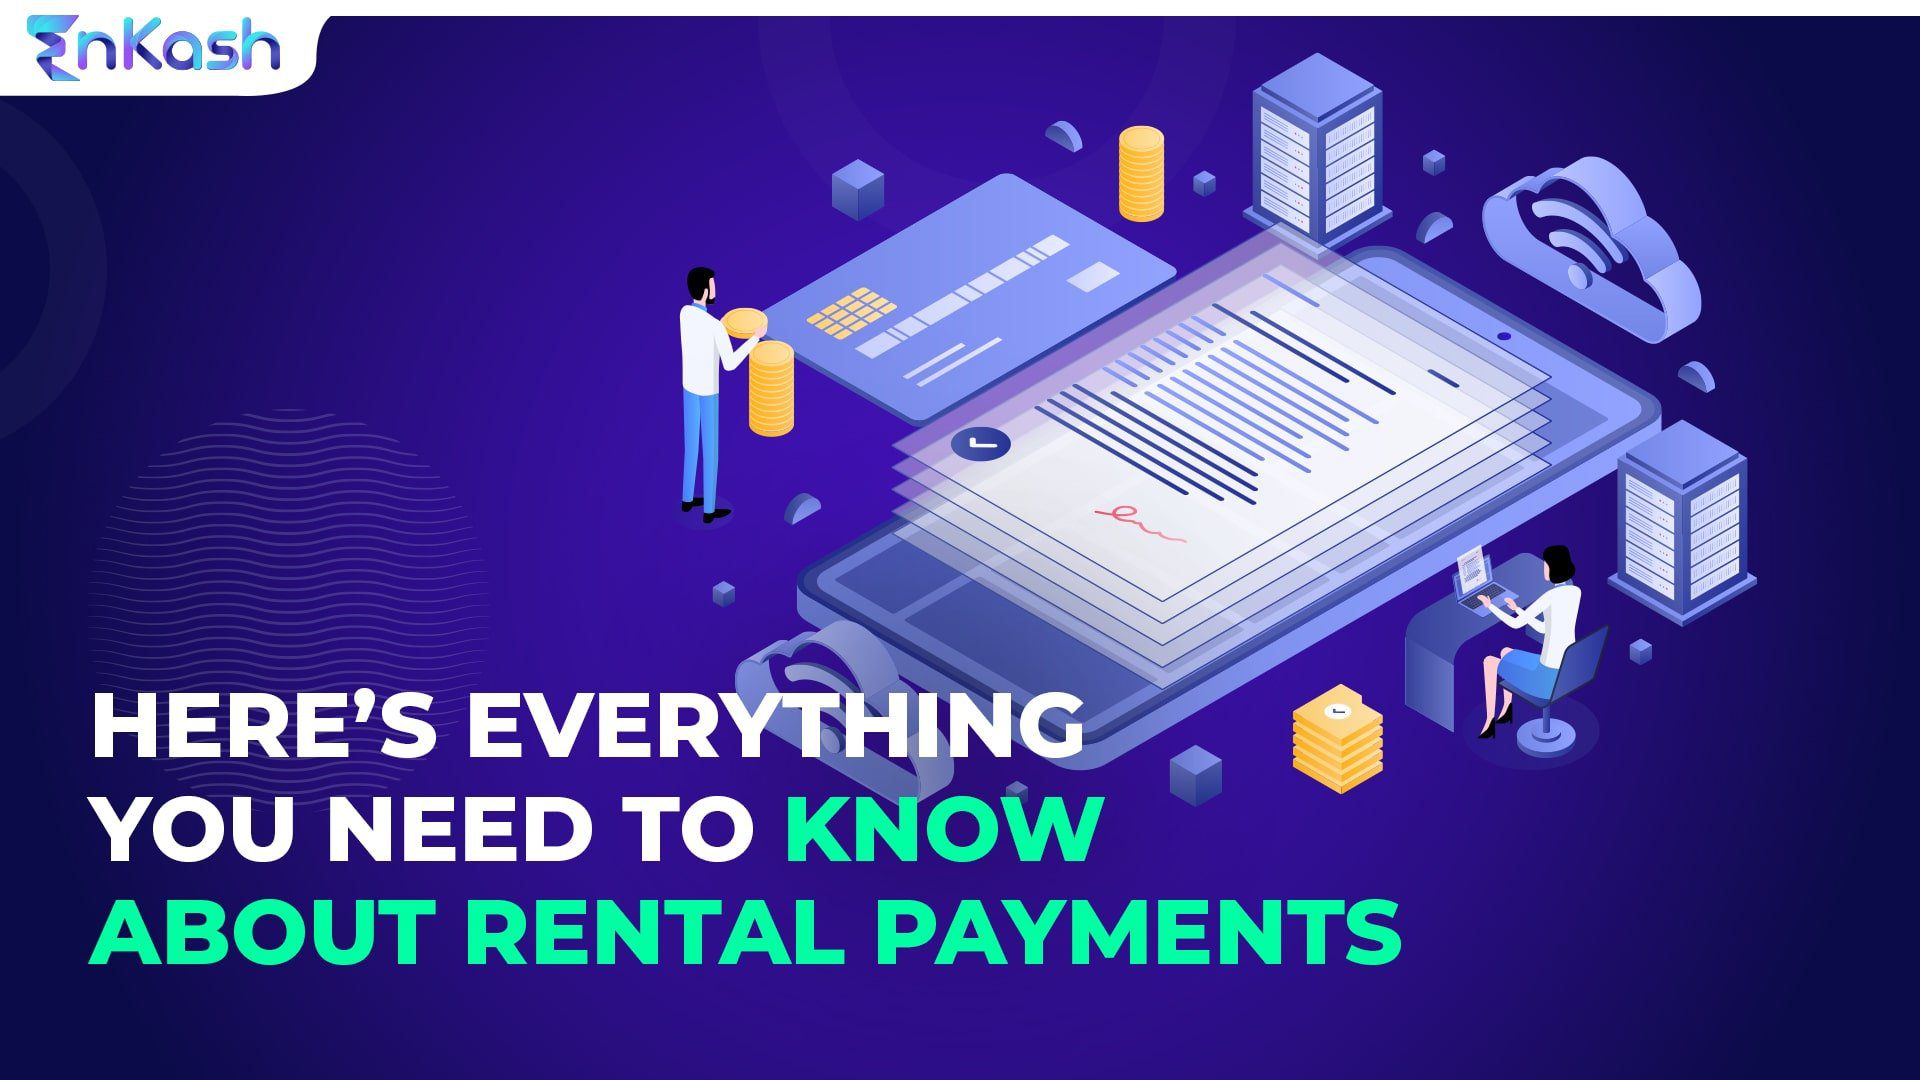 Here’s Everything You Need to Know About Rental Payments